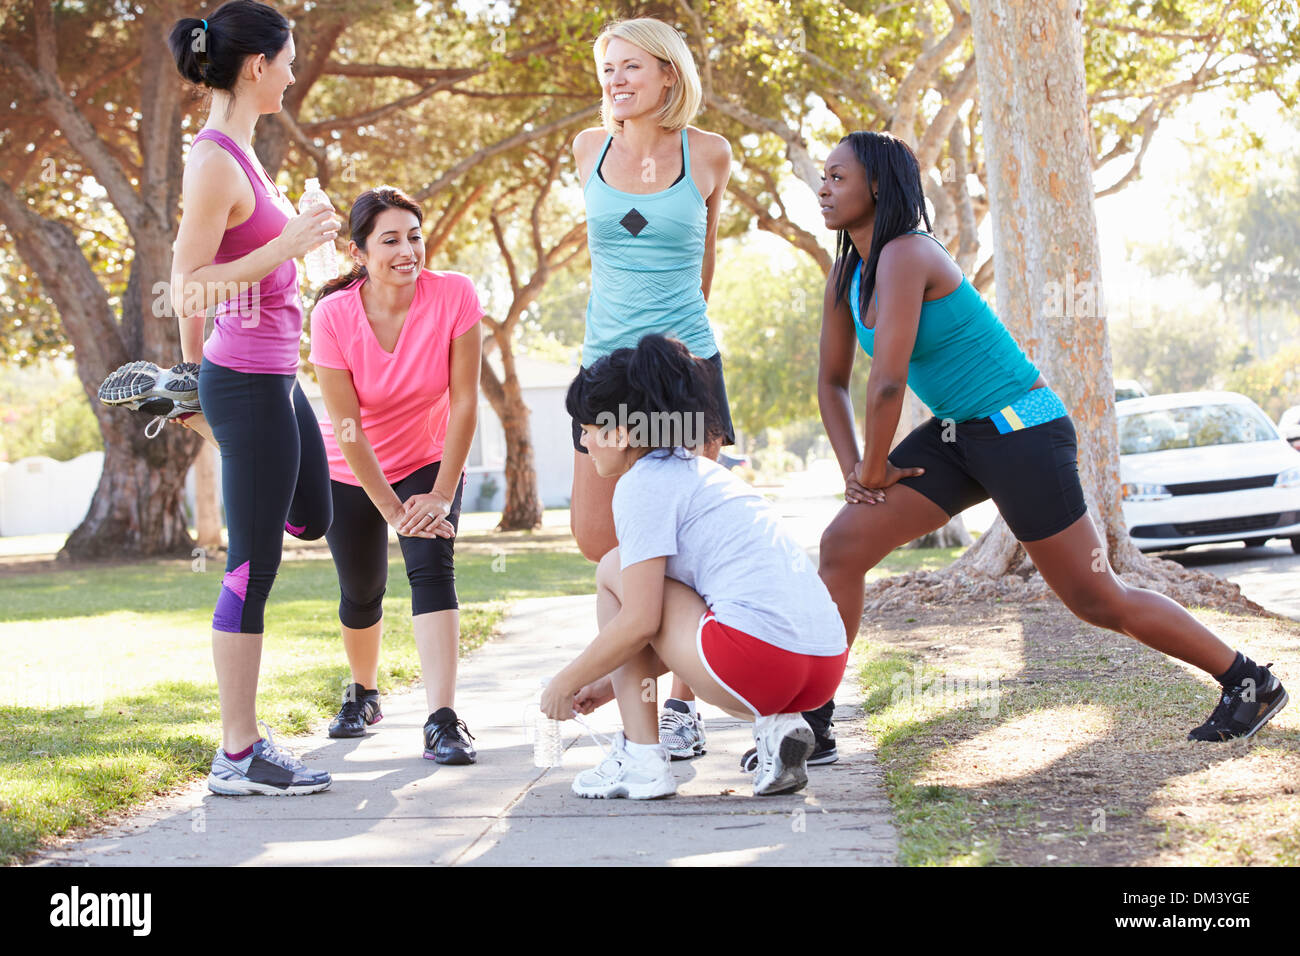 Group Of Female Runners Warming Up Before Run Stock Photo